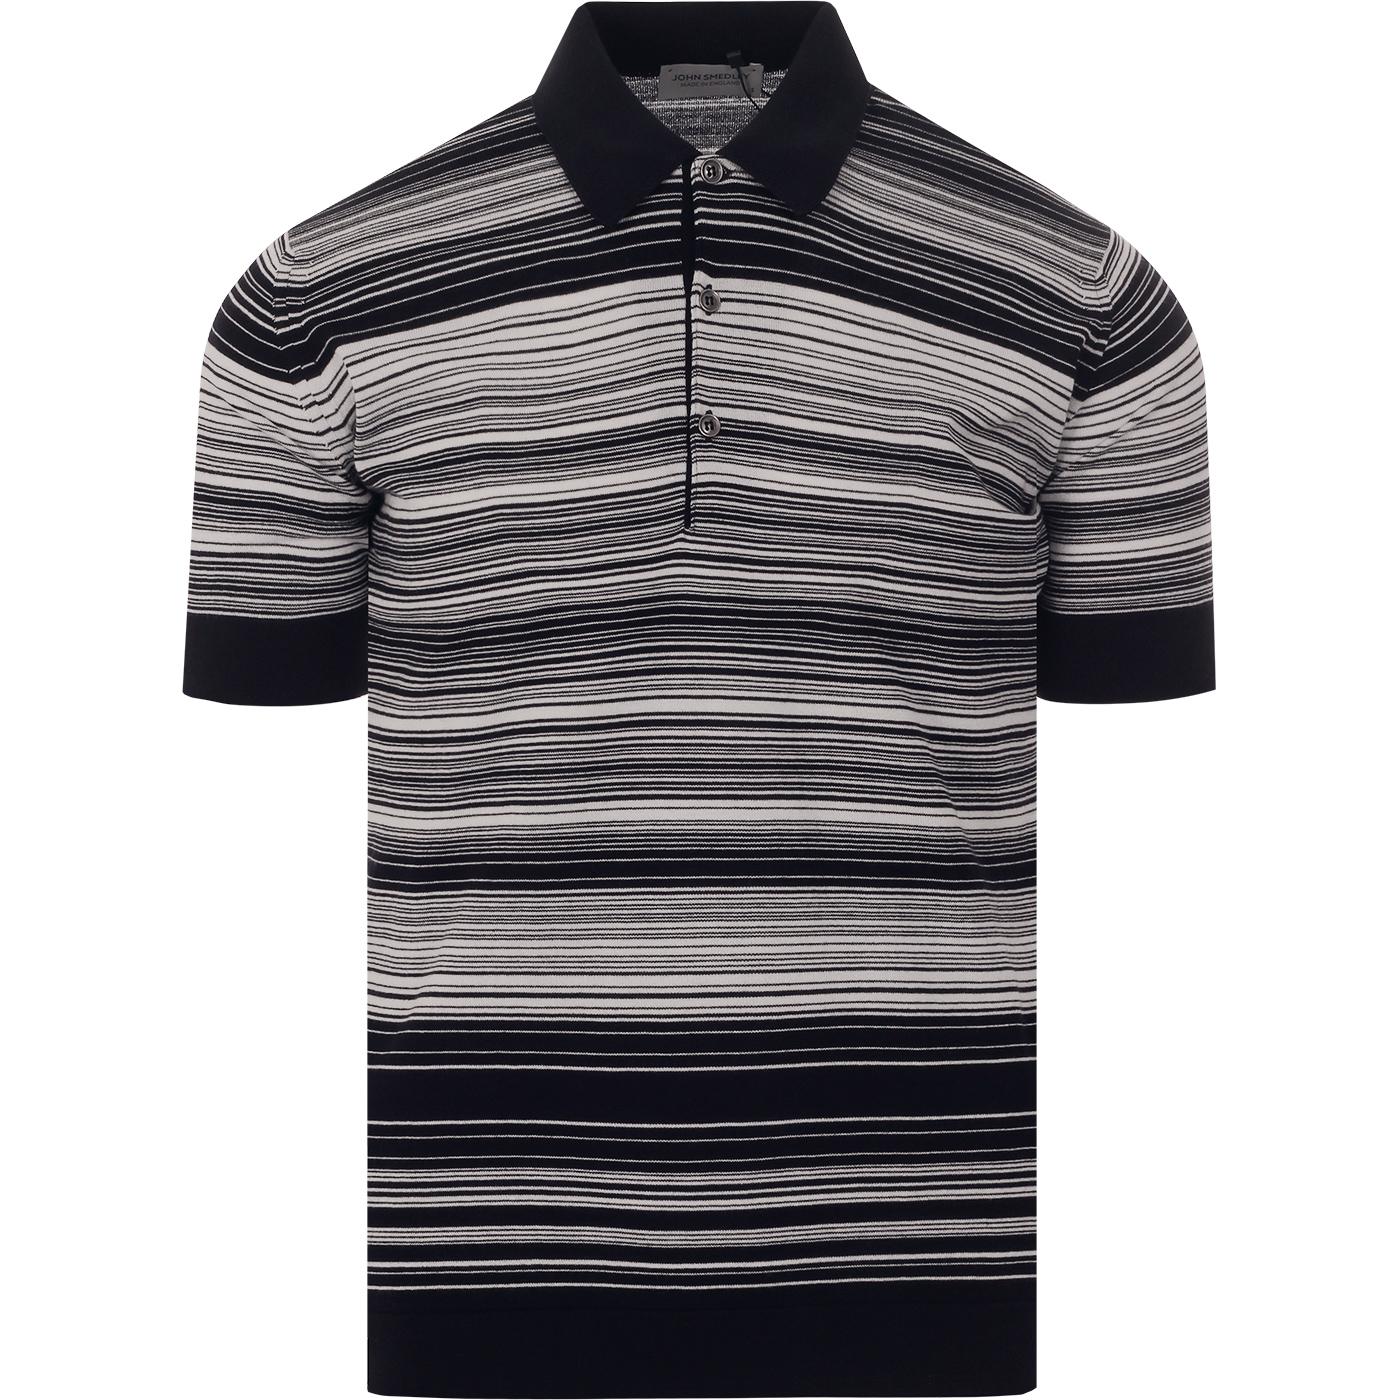 Timber JOHN SMEDLEY Made in England Stripe Polo N